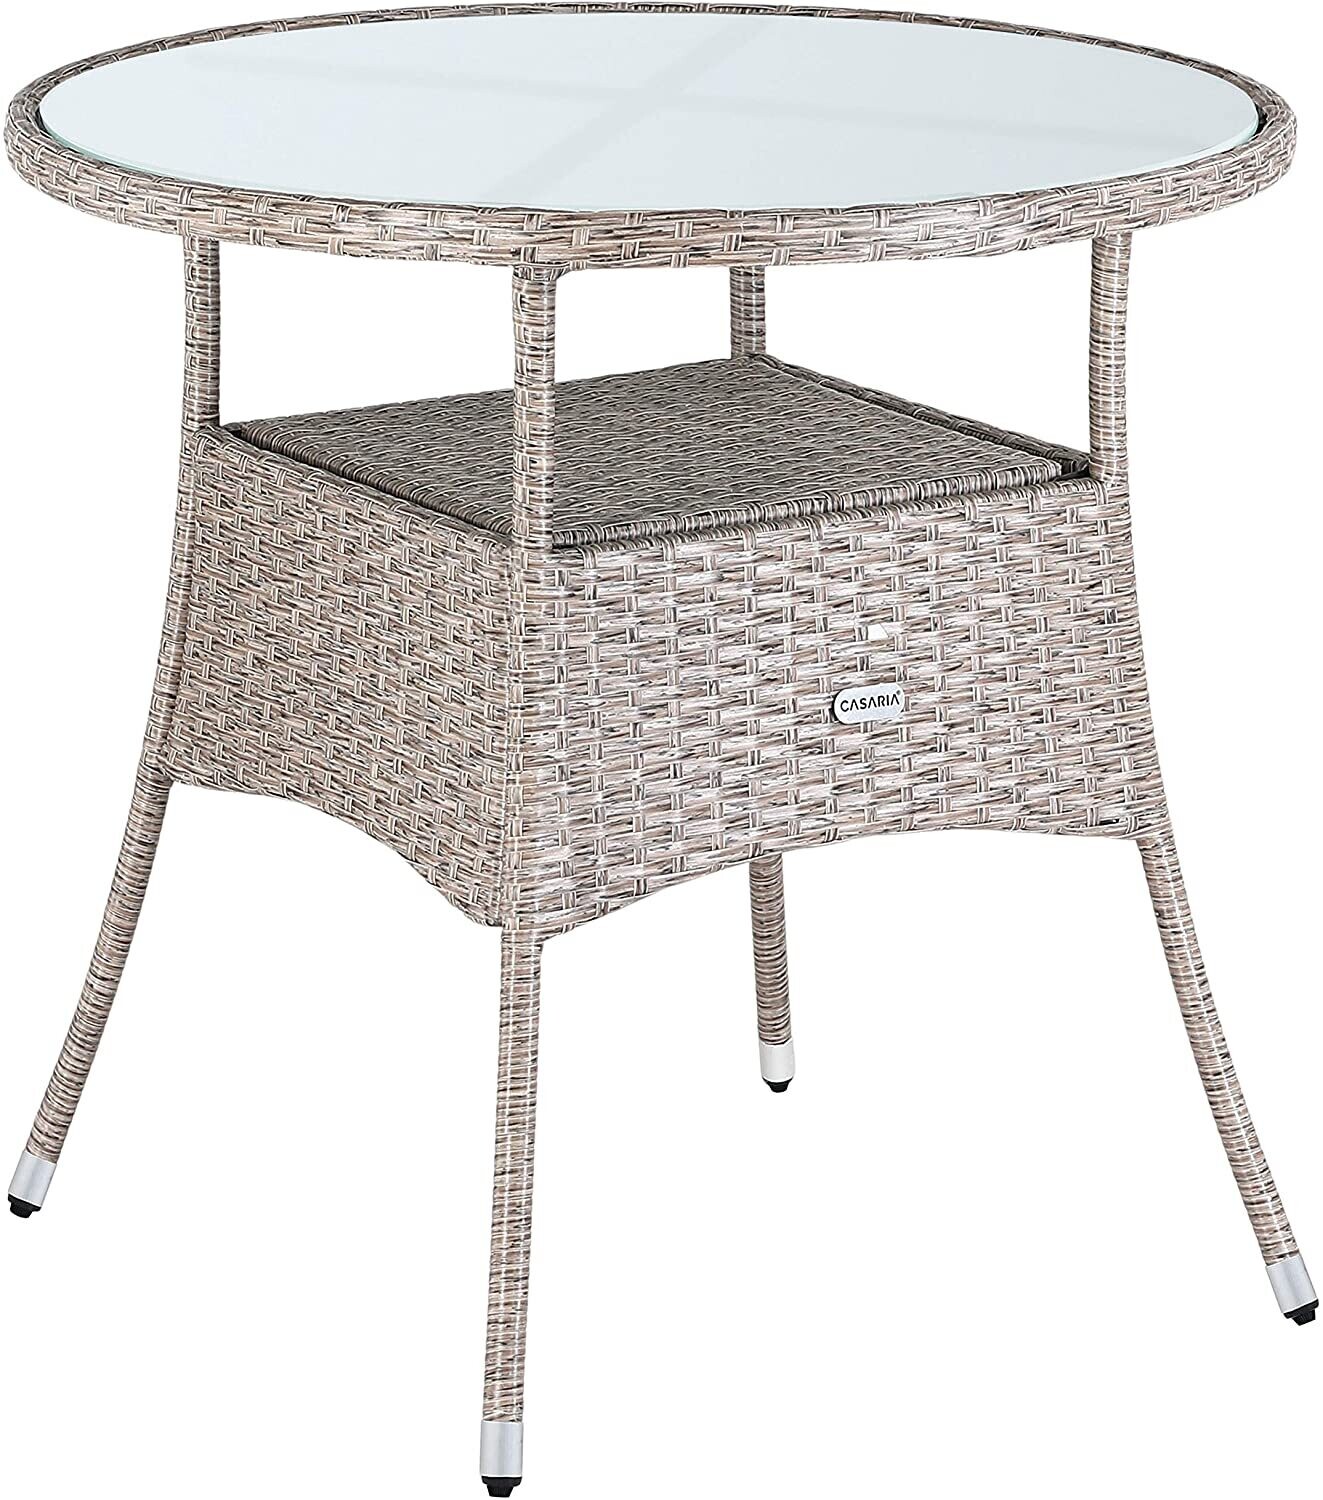 Polyrattan Side Table/Garden Table with Frosted Glass